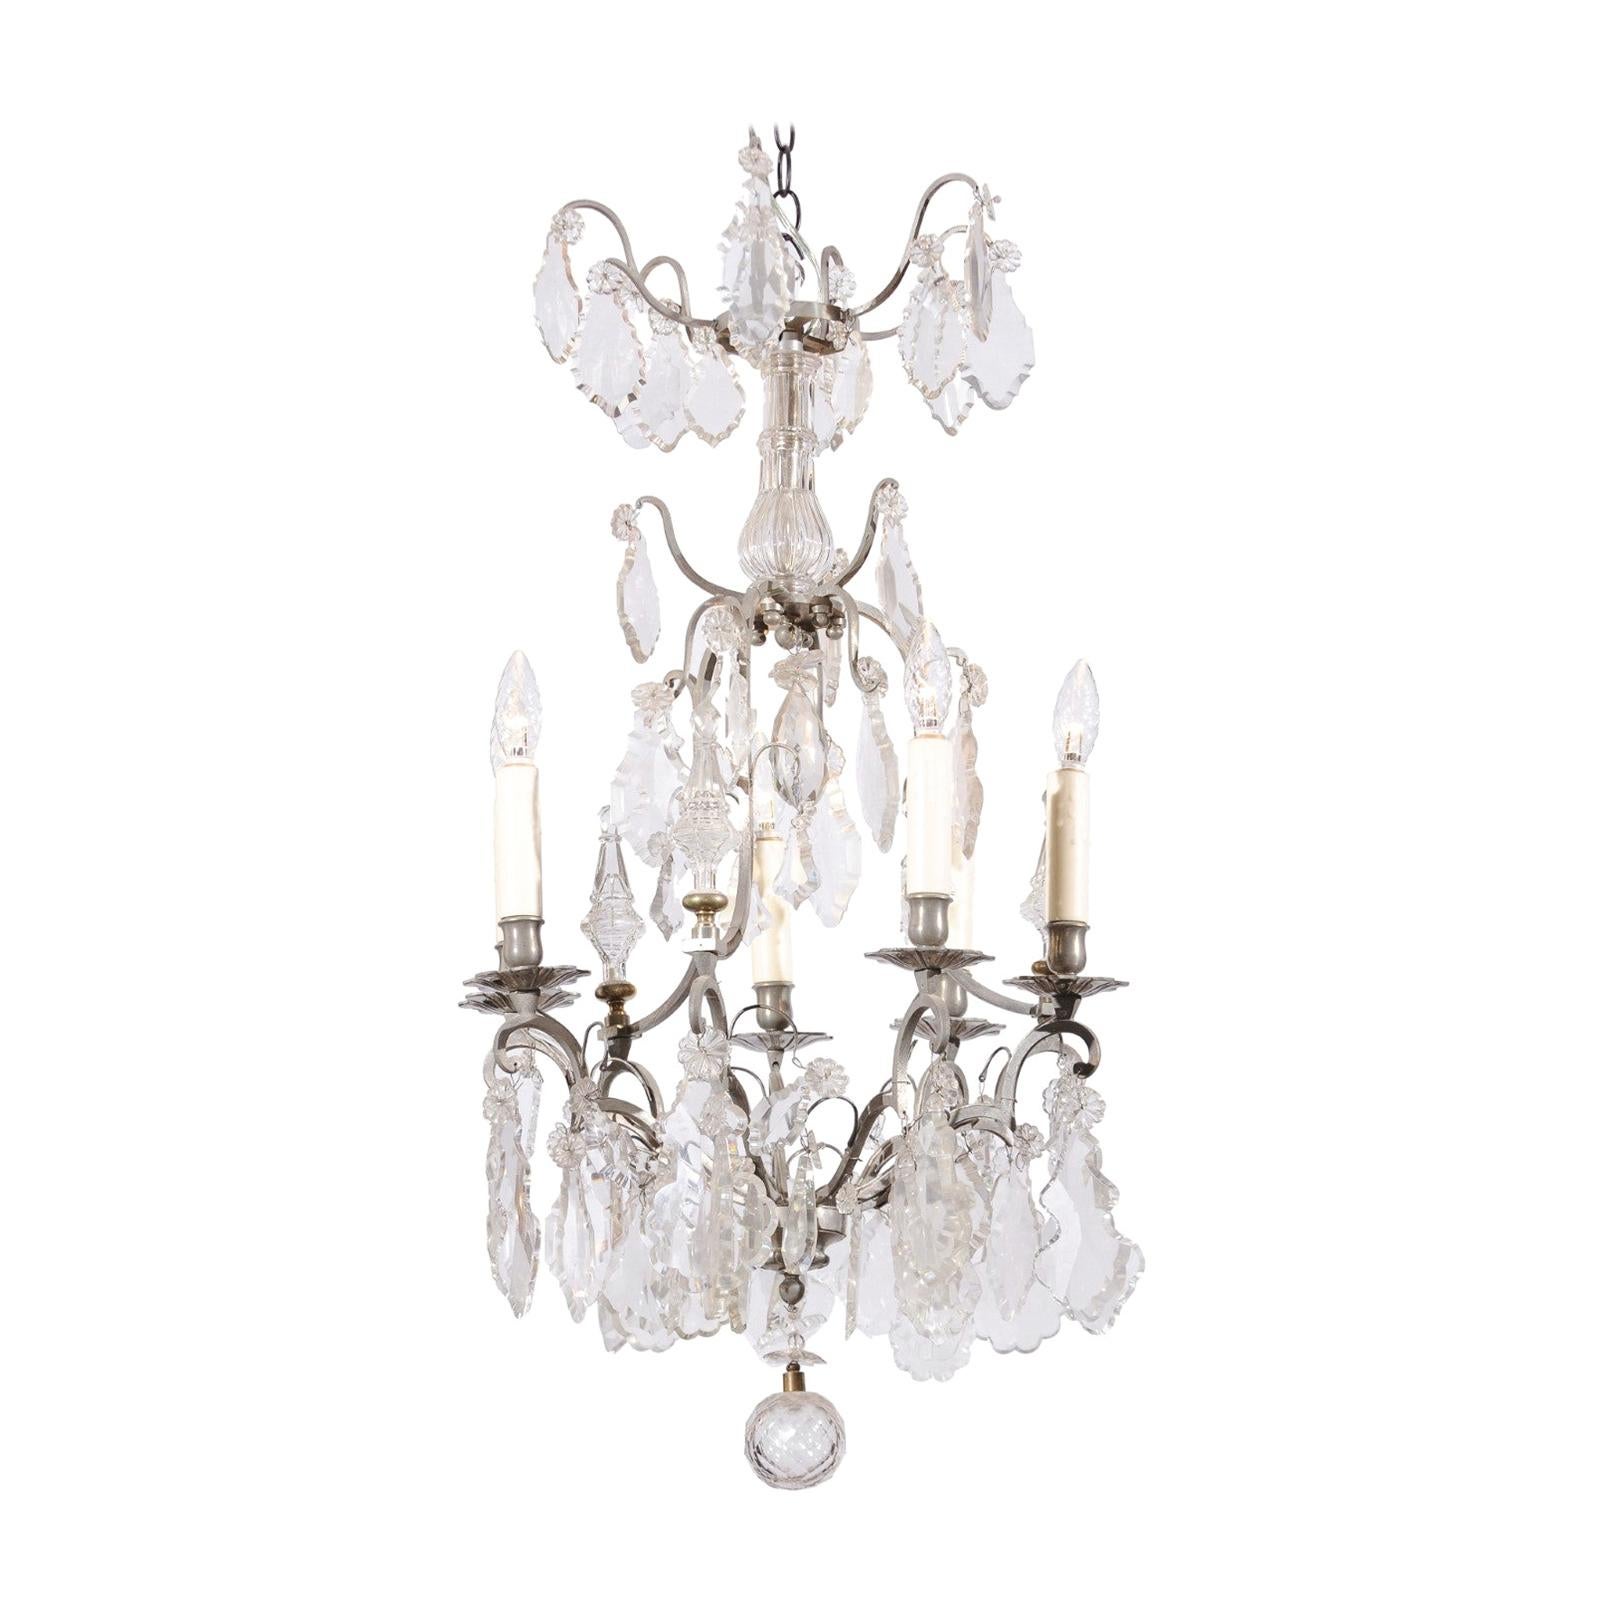 French 19th Century Six-Light Crystal Chandelier with Silvered Iron Armature For Sale